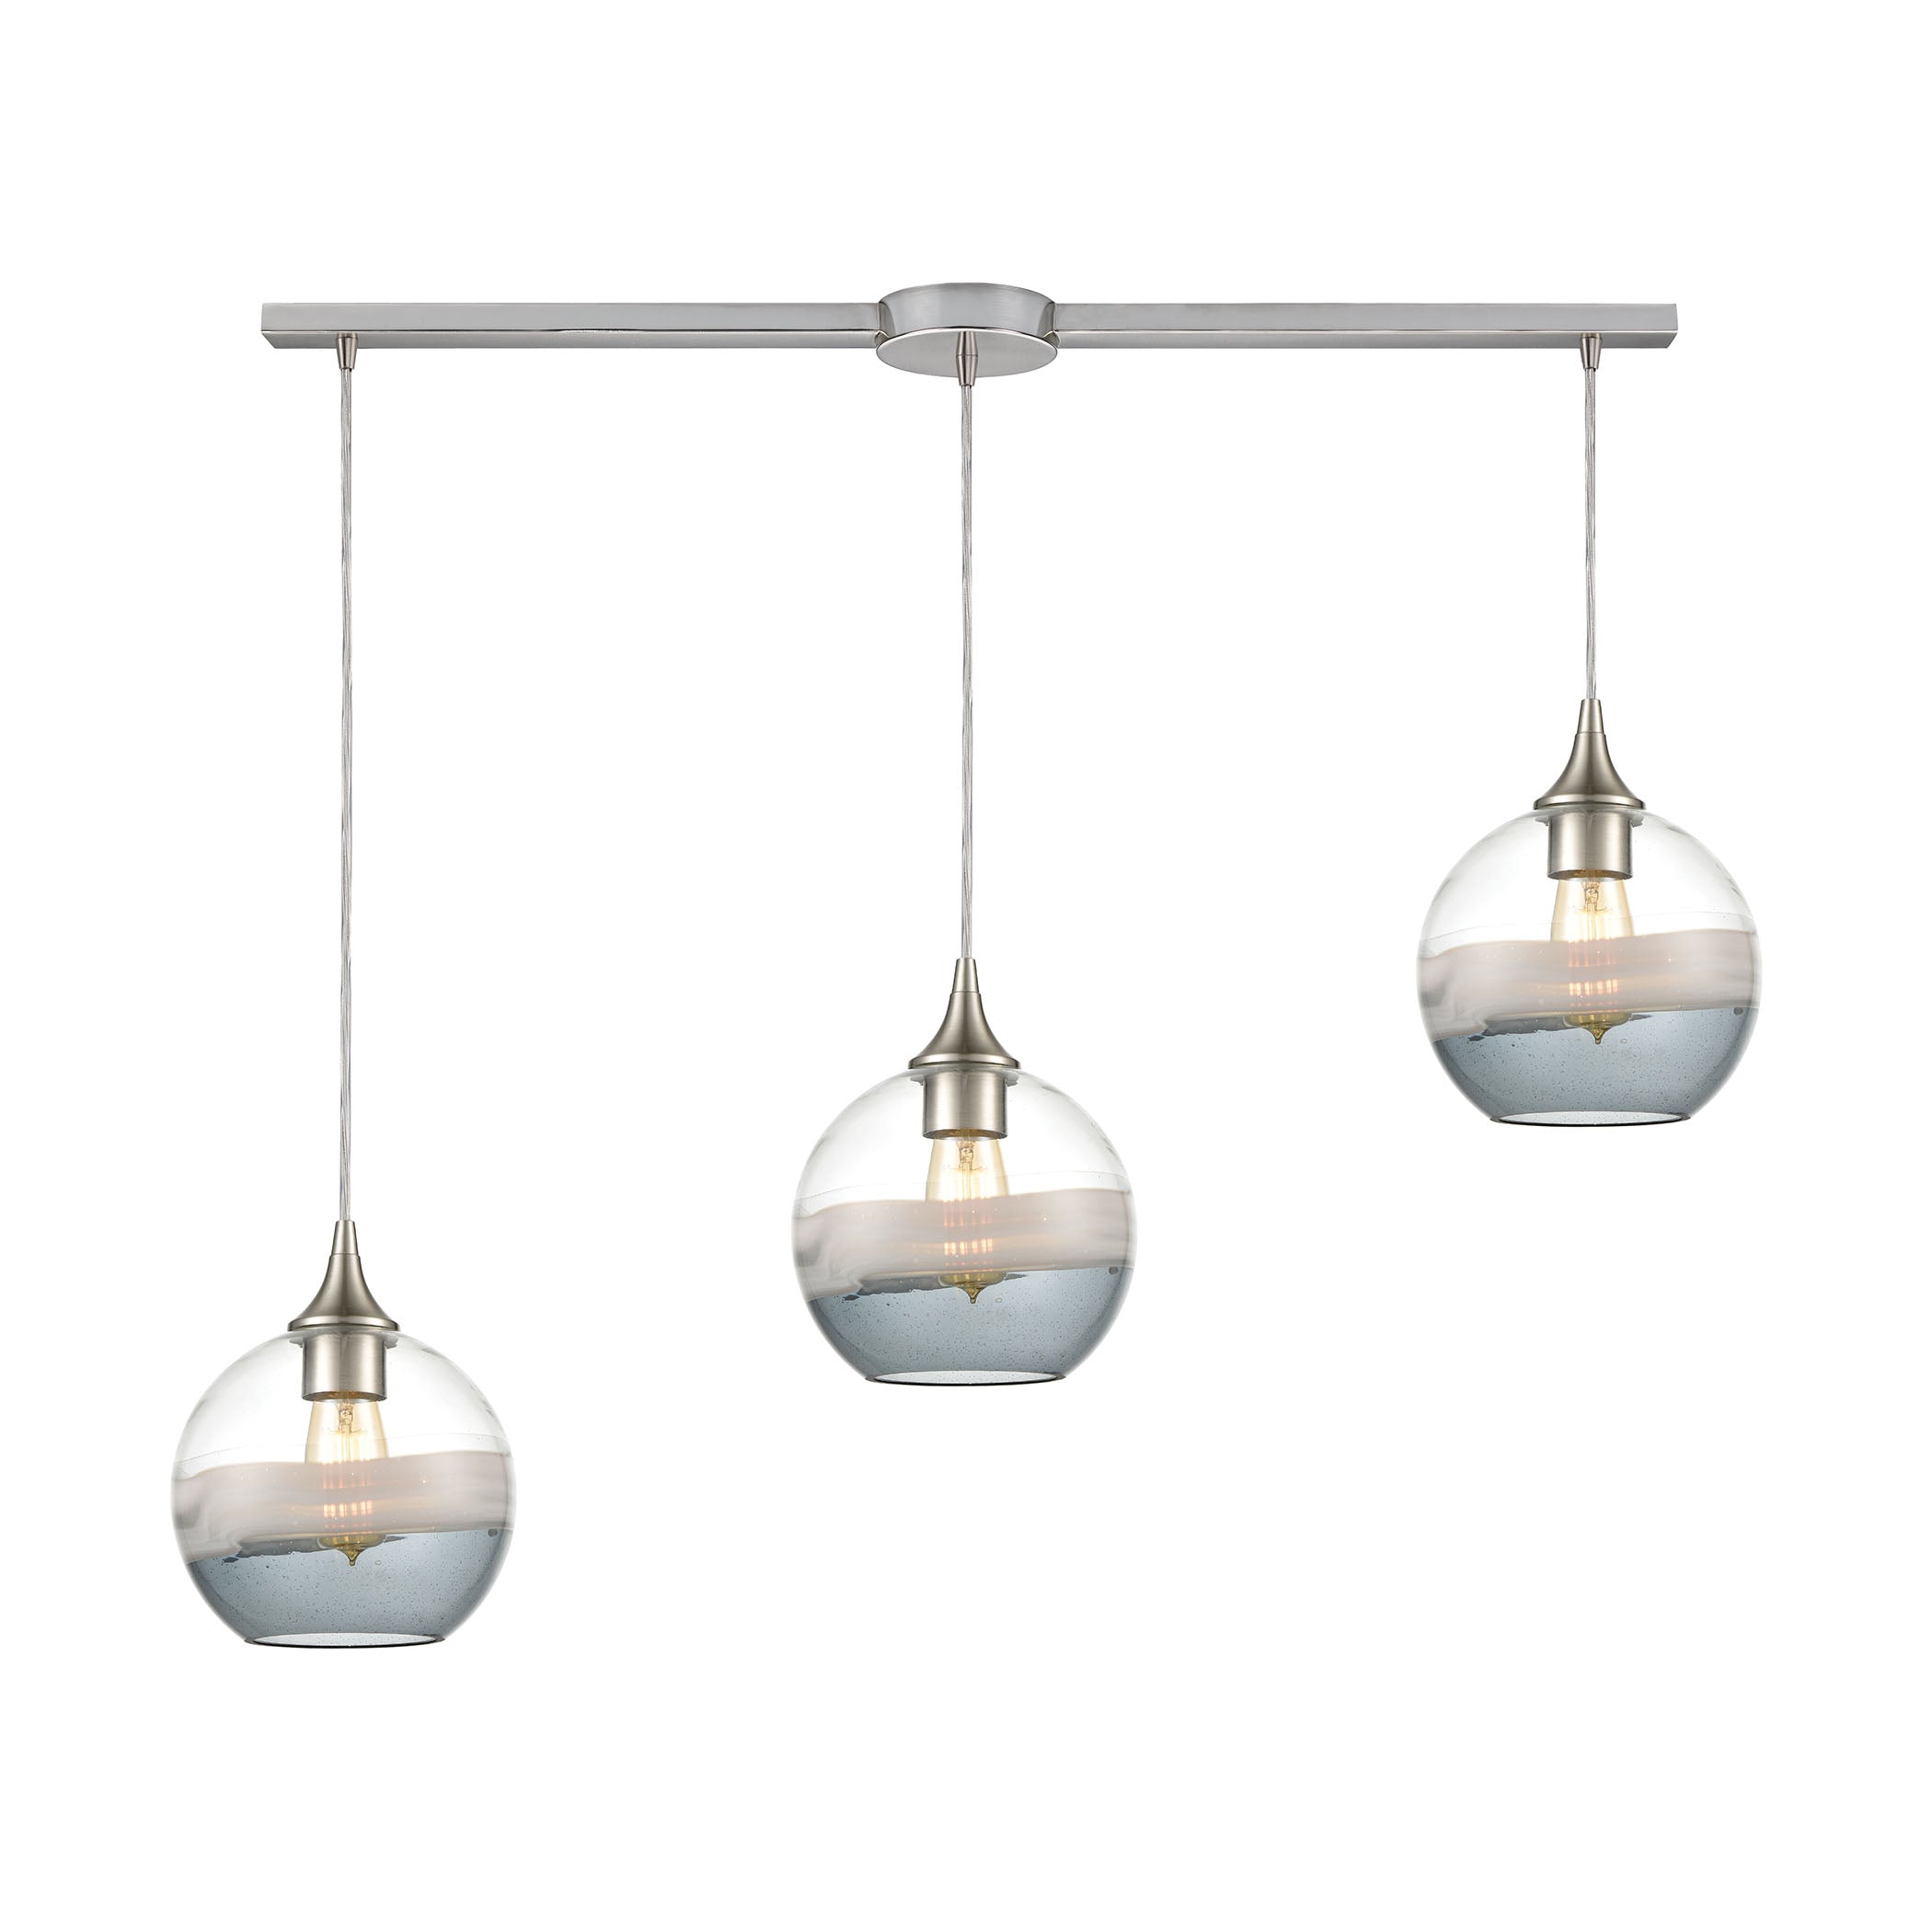 ELK Lighting 25099/3L Sutter Creek 3-Light Linear Mini Pendant Fixture with Clear, Grey, and Smoke Seedy Glass